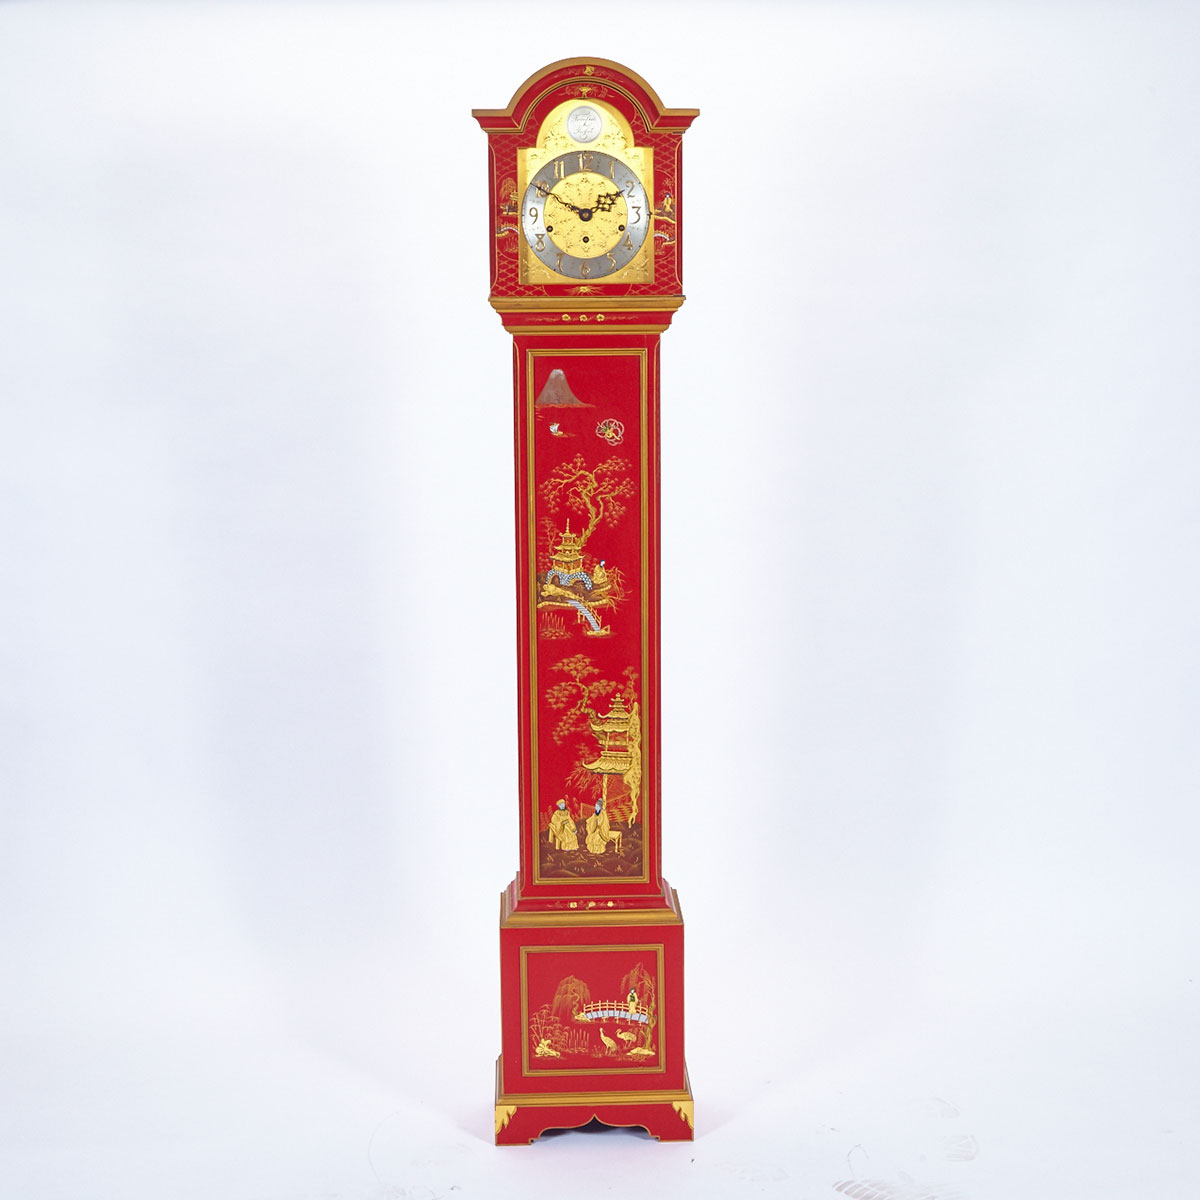 Red Japanned ‘Grandmother’ Clock by Elliot of London, mid 20th century